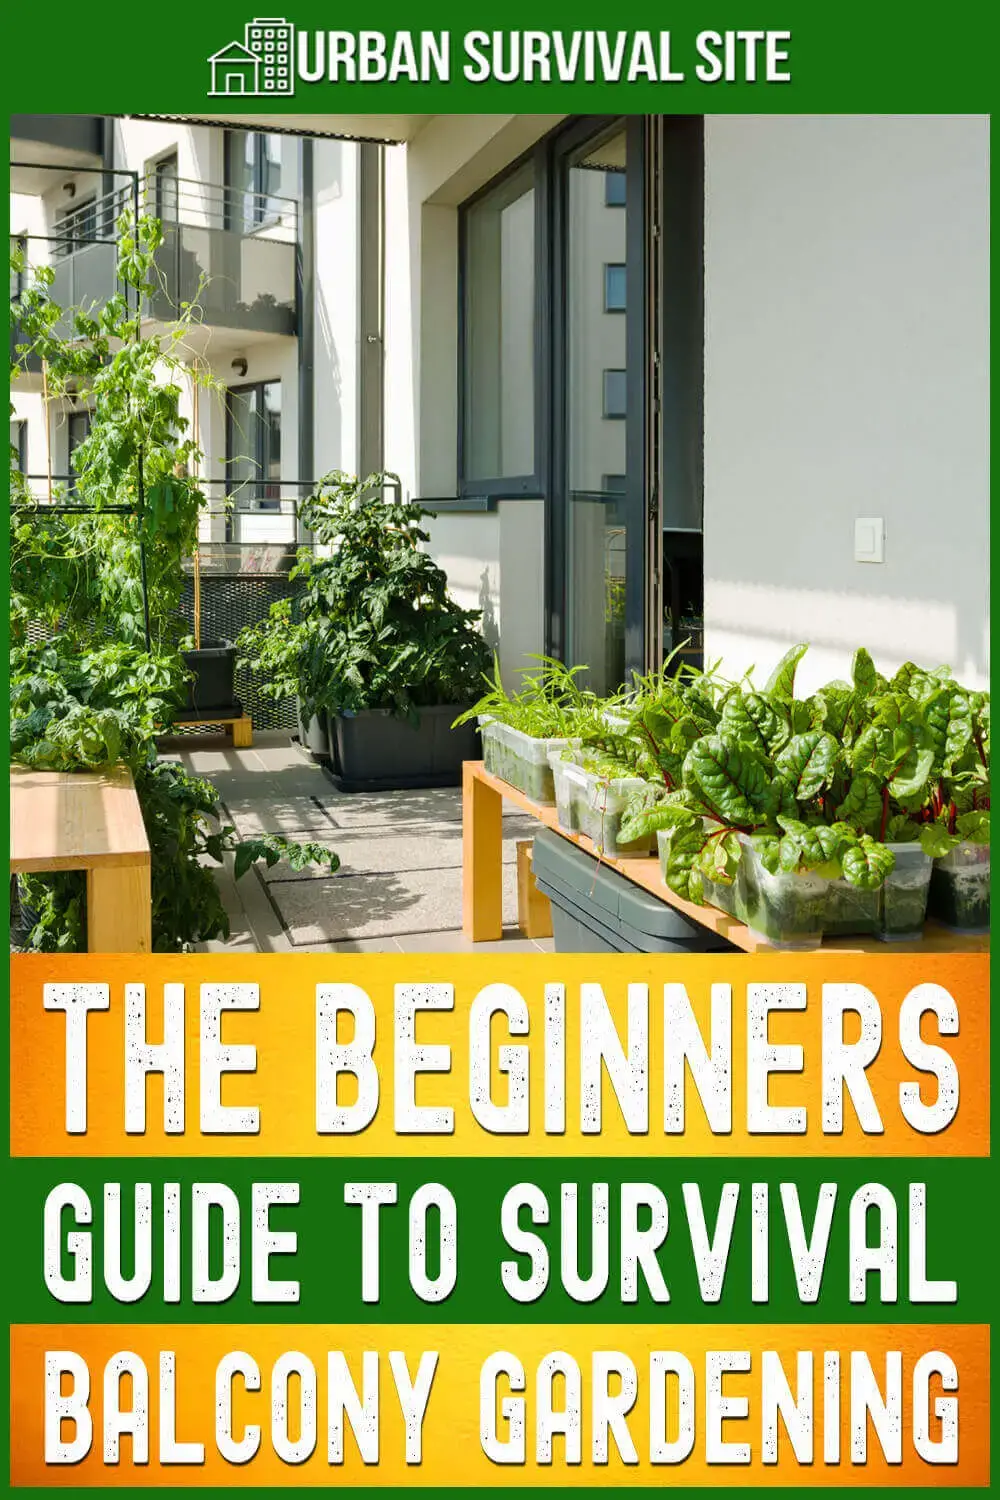 Gardening on Your Balcony, Deck or Porch The-beginners-guide-to-survival-balcony-gardening-pin-1